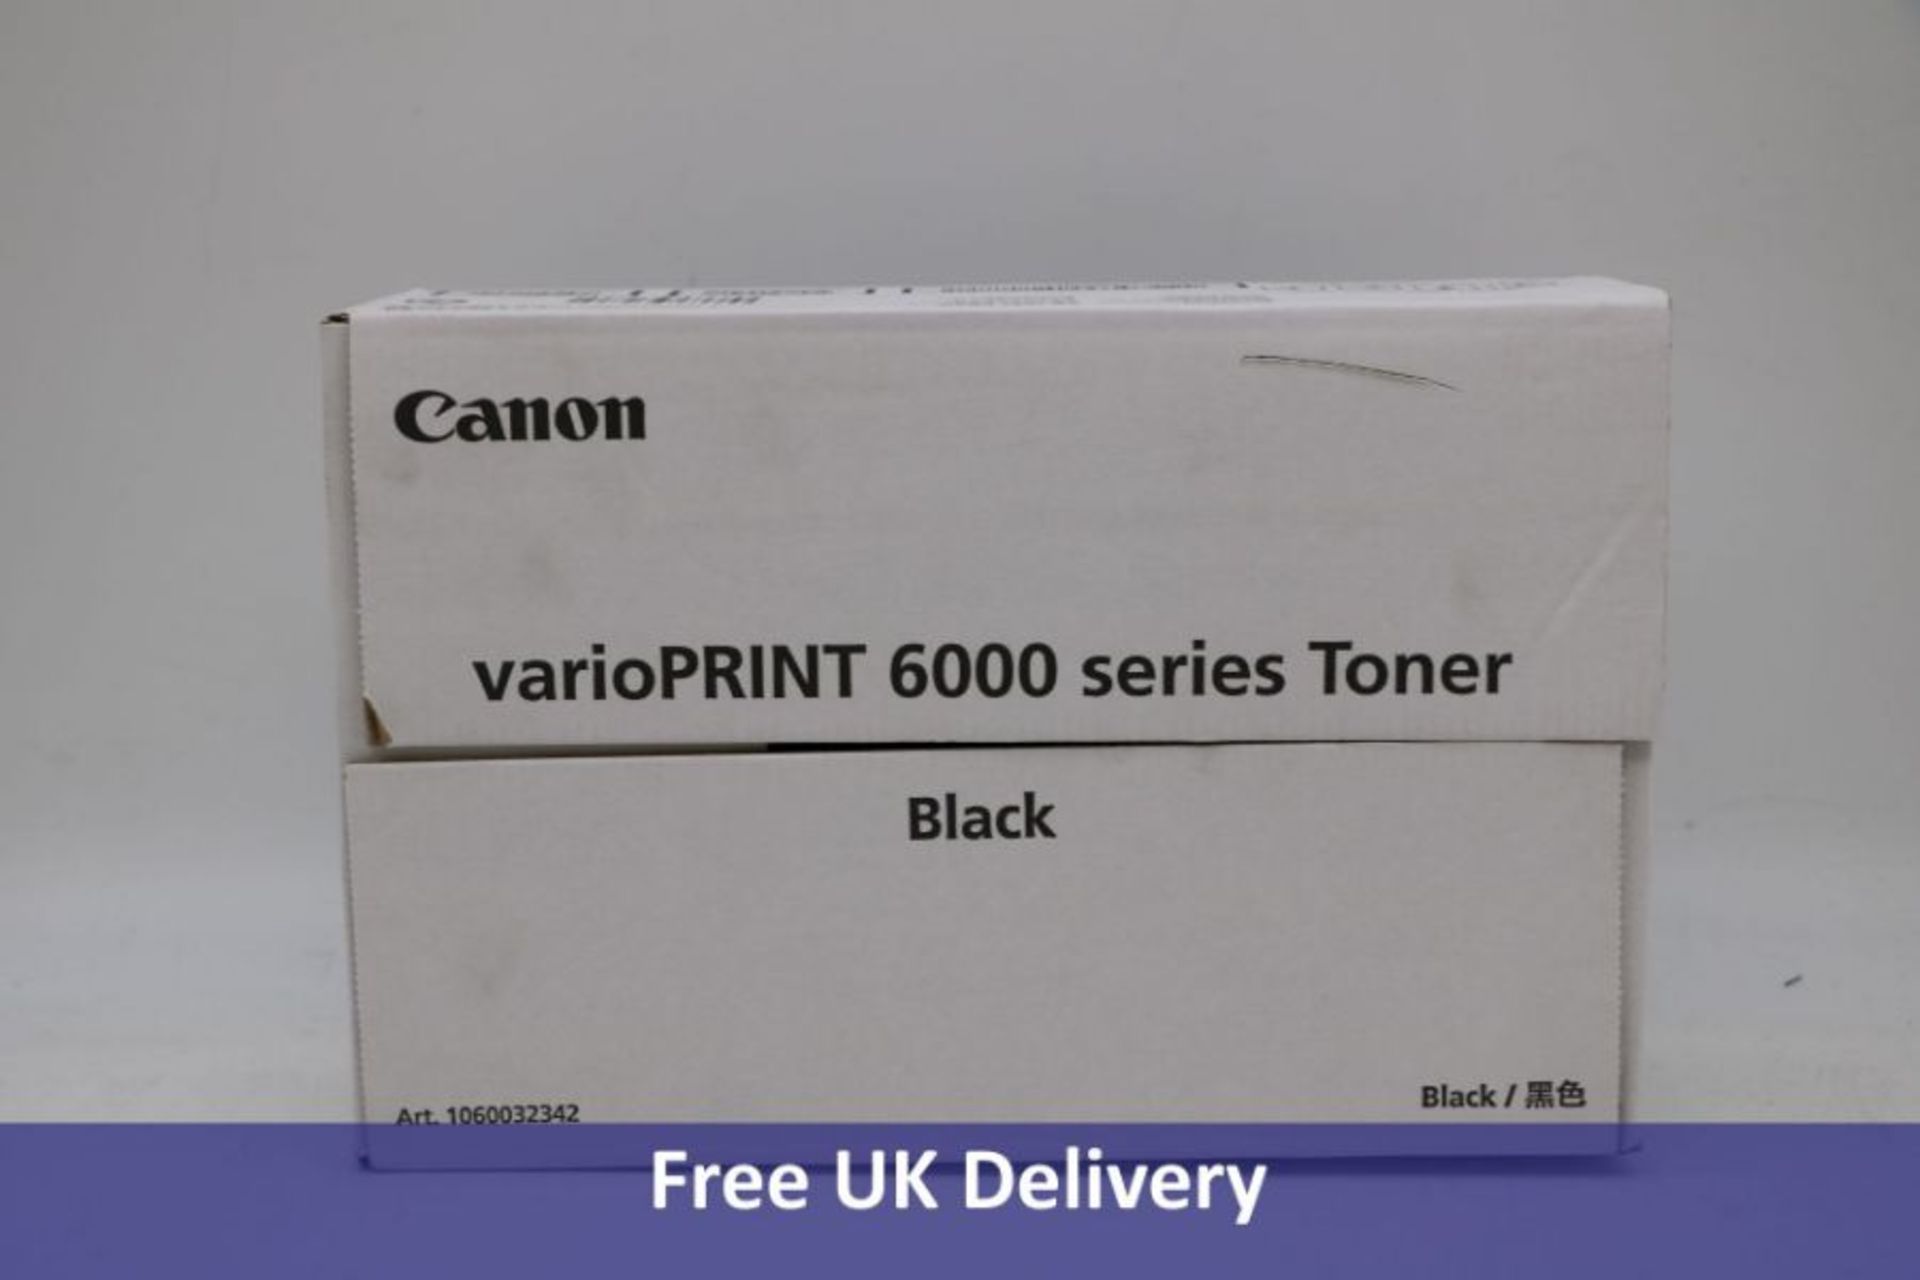 Four Assorted Canon items to include 1x 0481C002 EXV51 Black Toner, 1x Cano Scan 400 Lide Scanner, B - Image 4 of 4